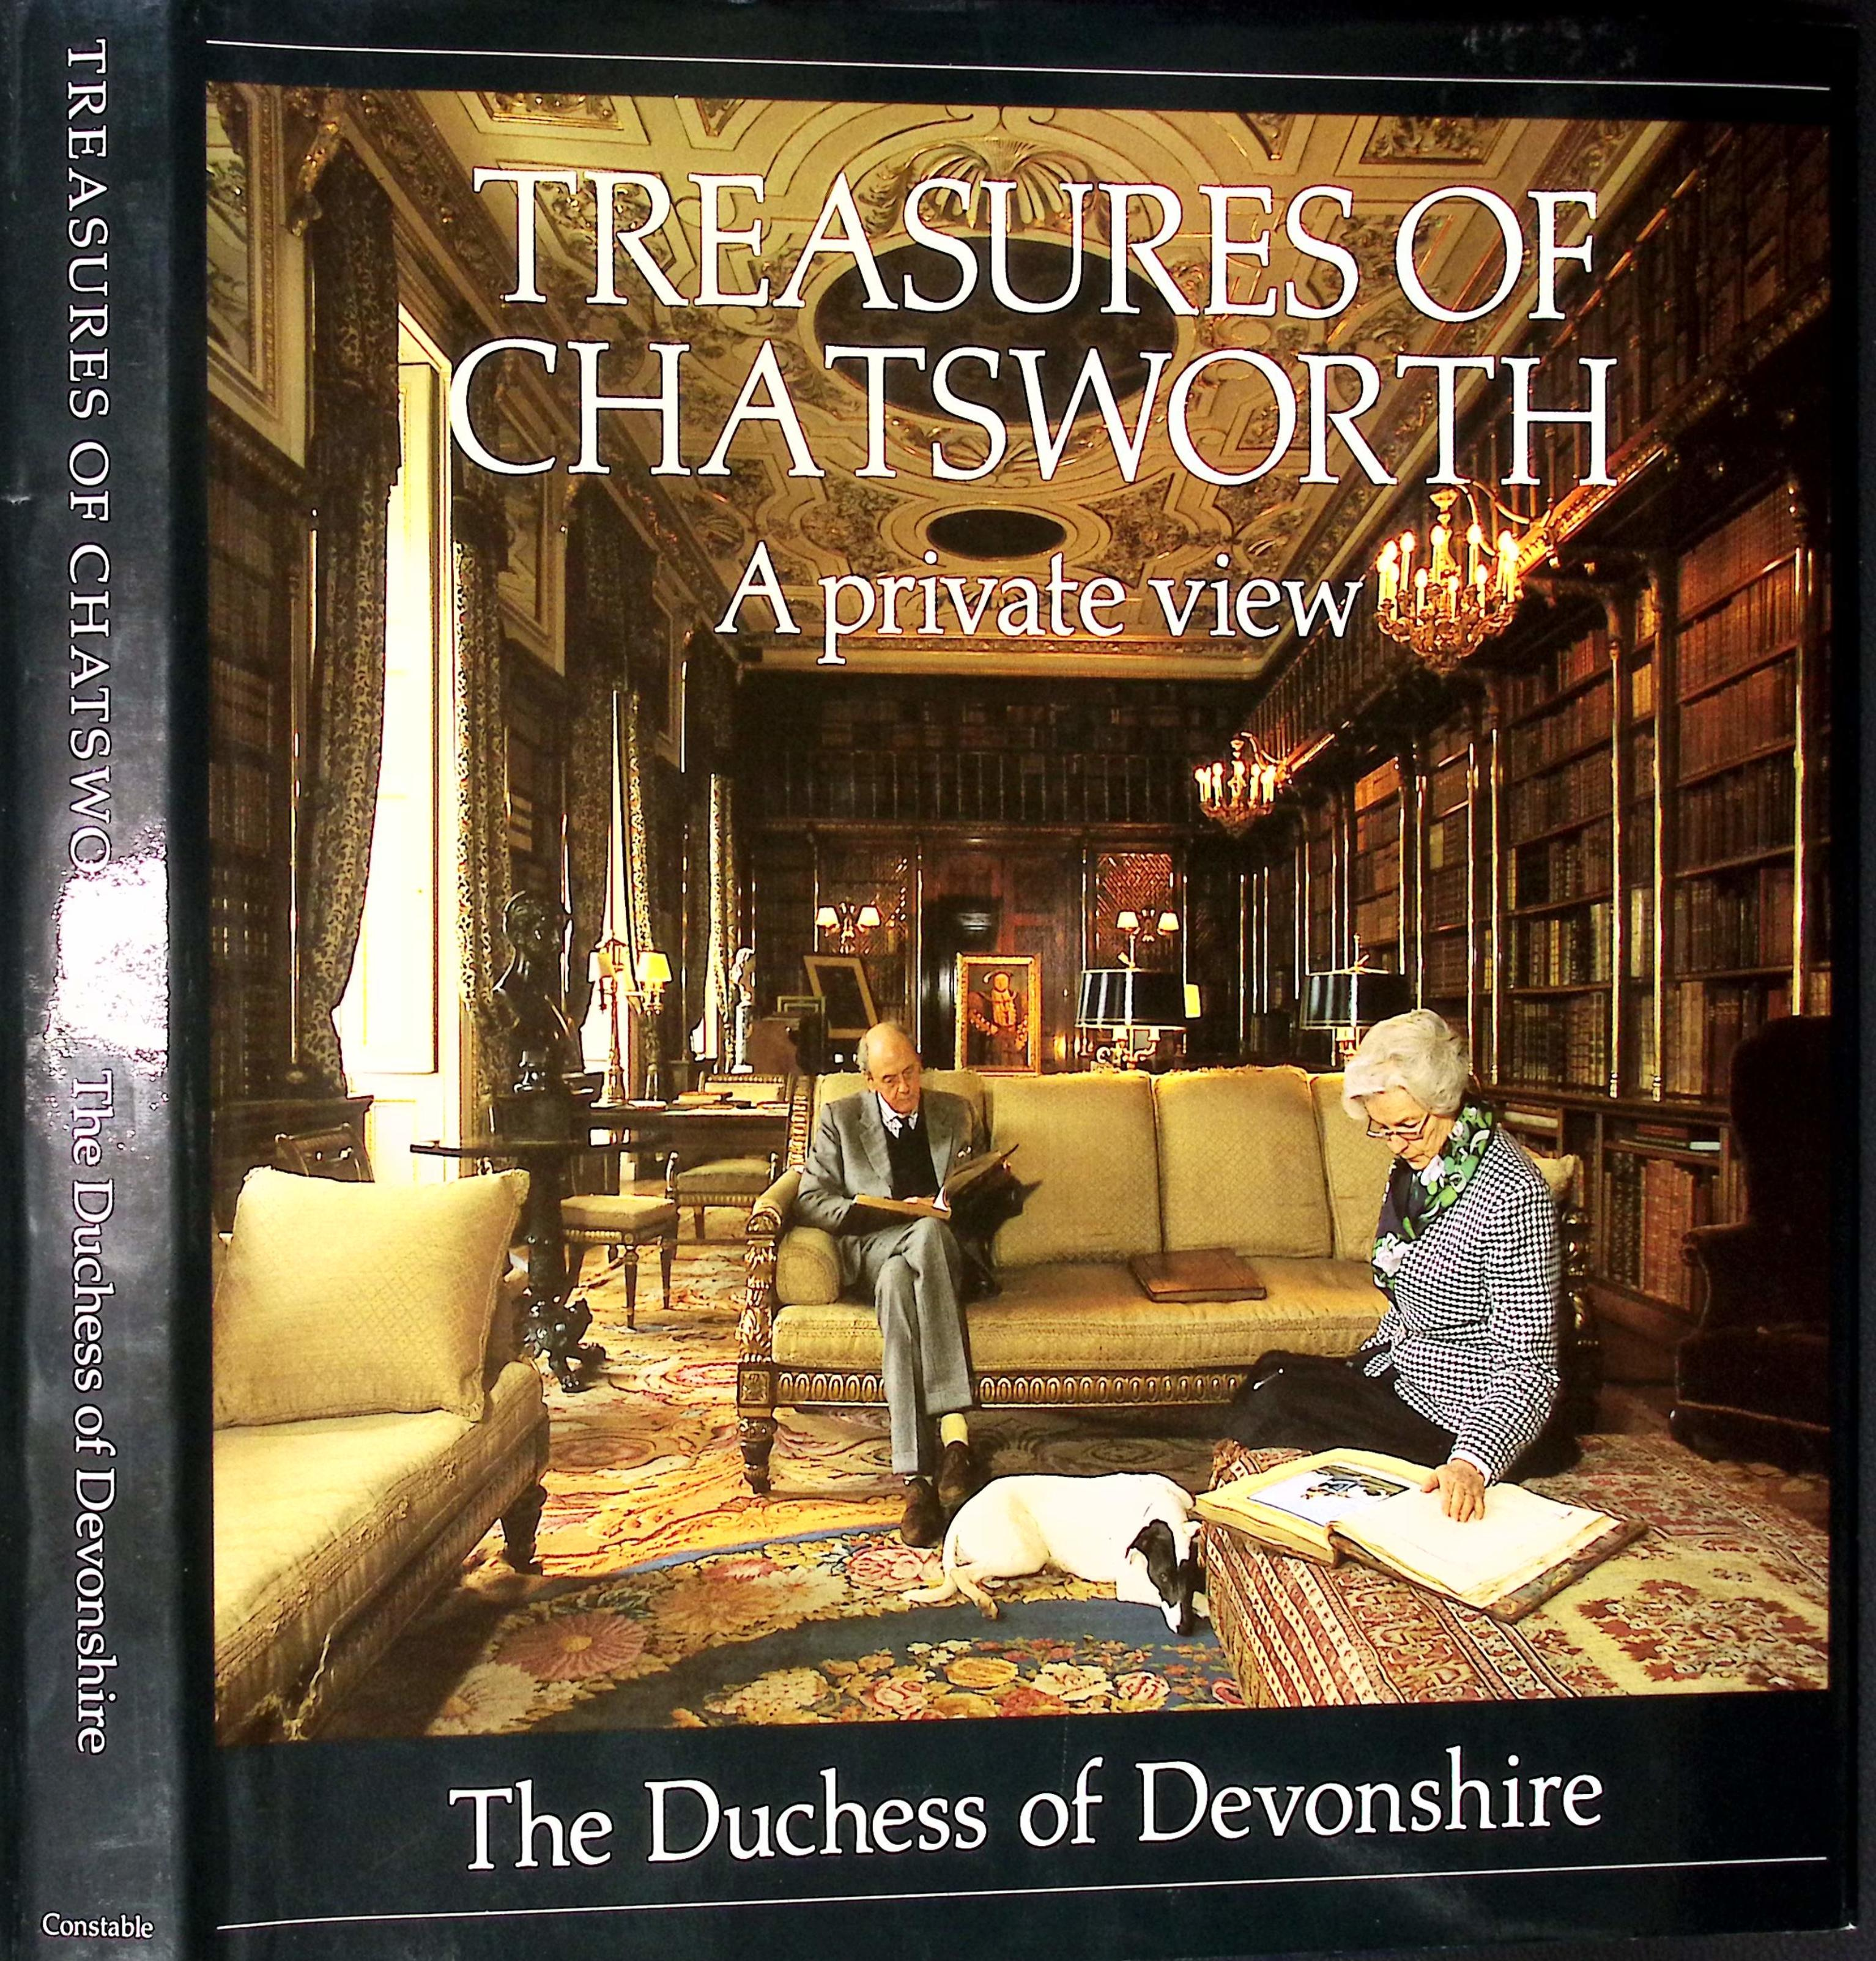 Treasures of Chatsworth. A private View. Signed copy.